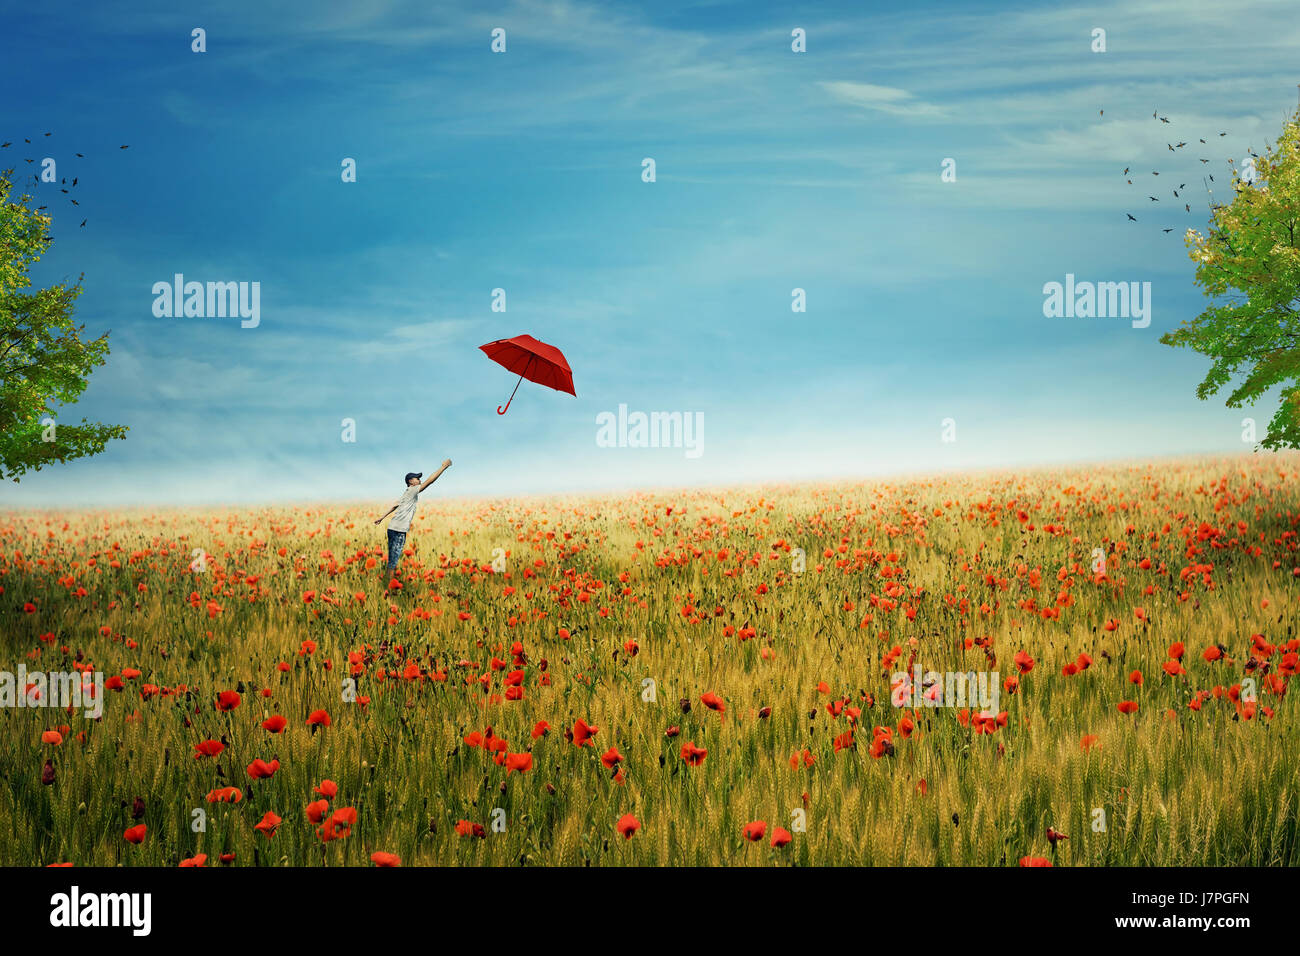 Young boy stand on a country meadow with million of red poppies, trying to catch his red umbrella that fly to the sky. The pursuit of happiness Stock Photo